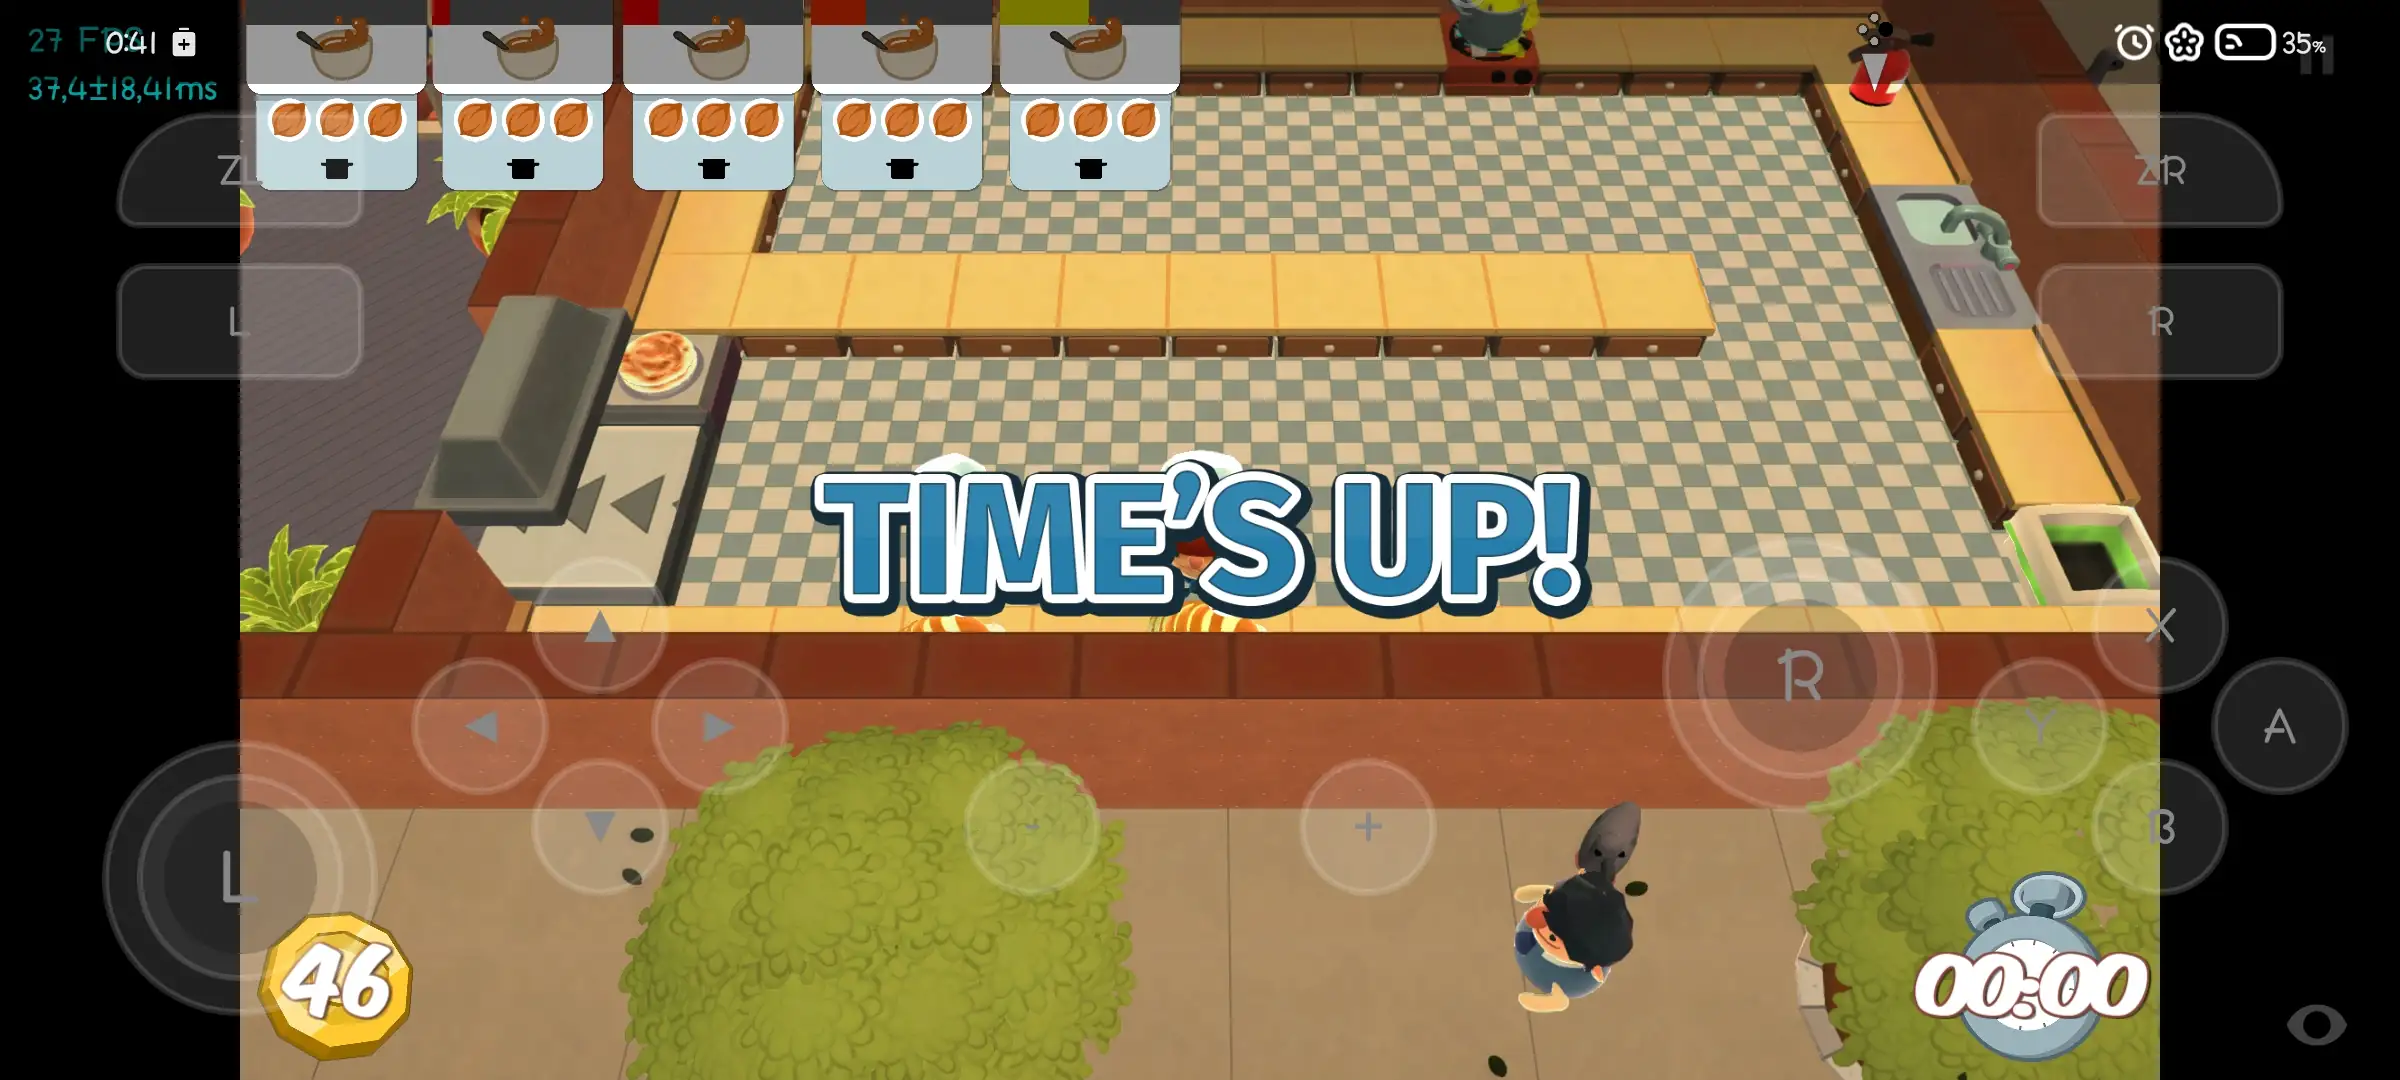 Overcooked Special Edition Android Télécharger APK OBB - Skyline Edge Emulator